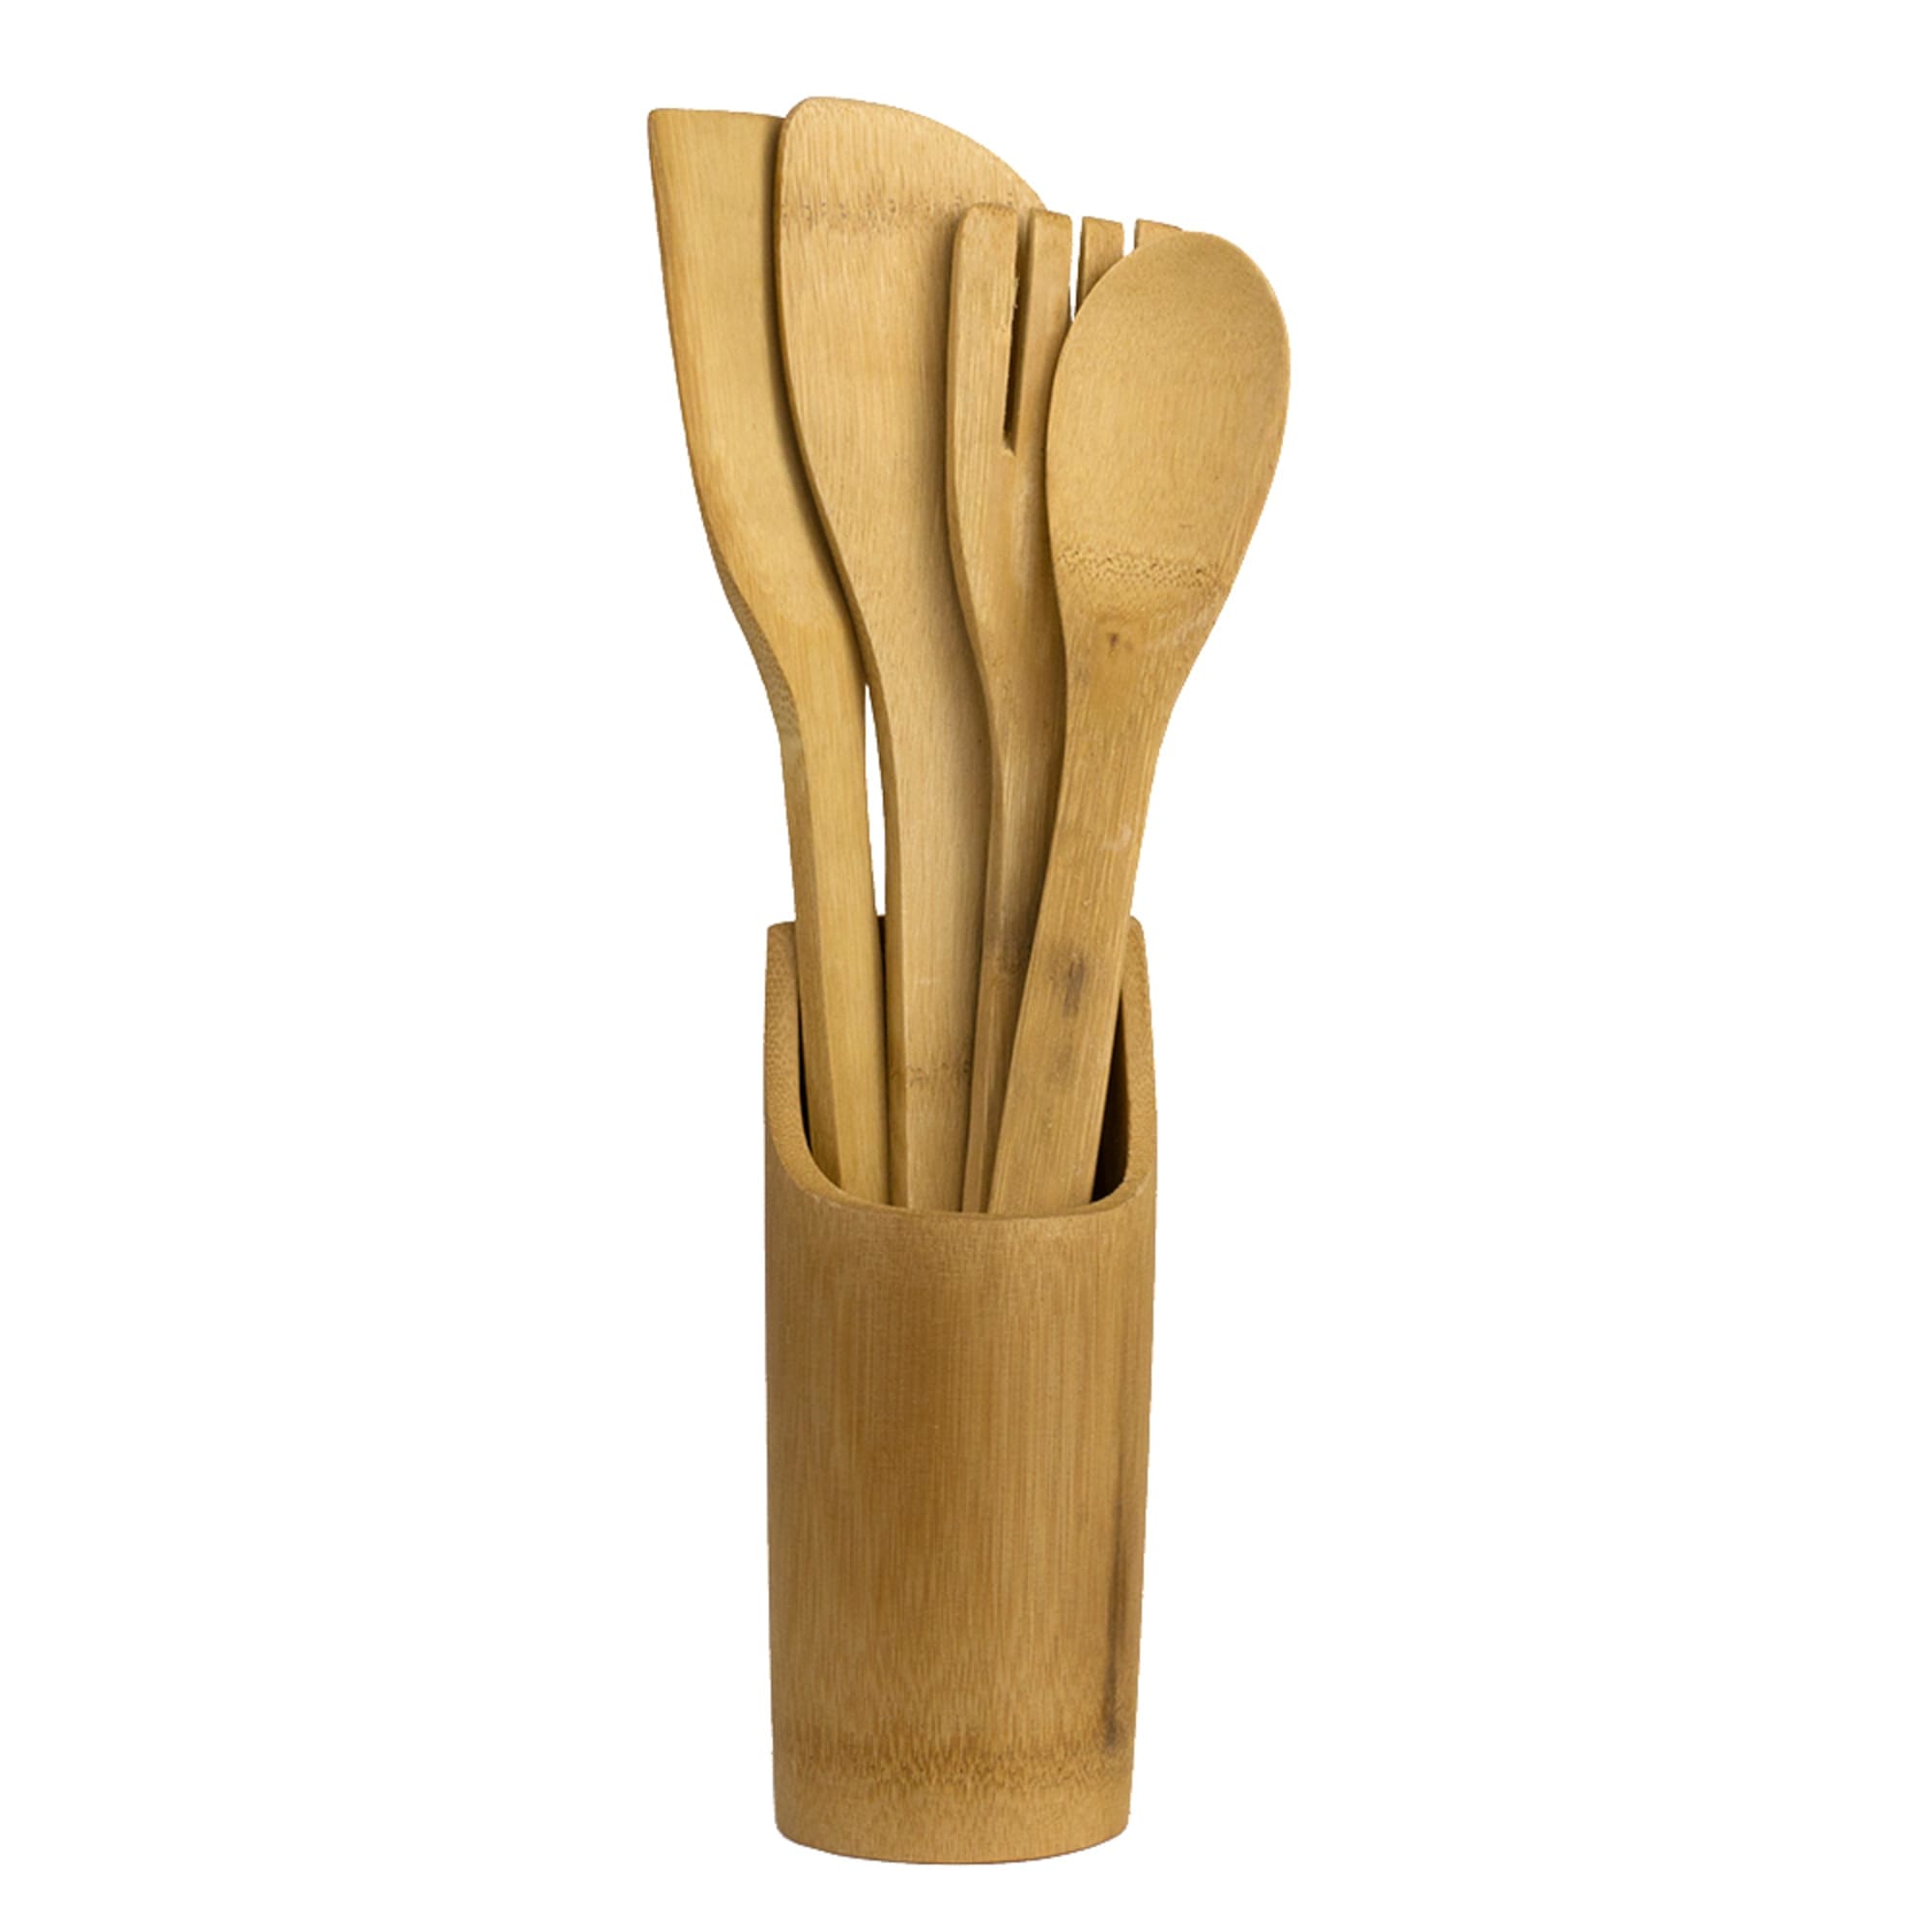 Home Basics 5 Piece Bamboo Utensil Set with Sculptural Holder, Natural $4.00 EACH, CASE PACK OF 24